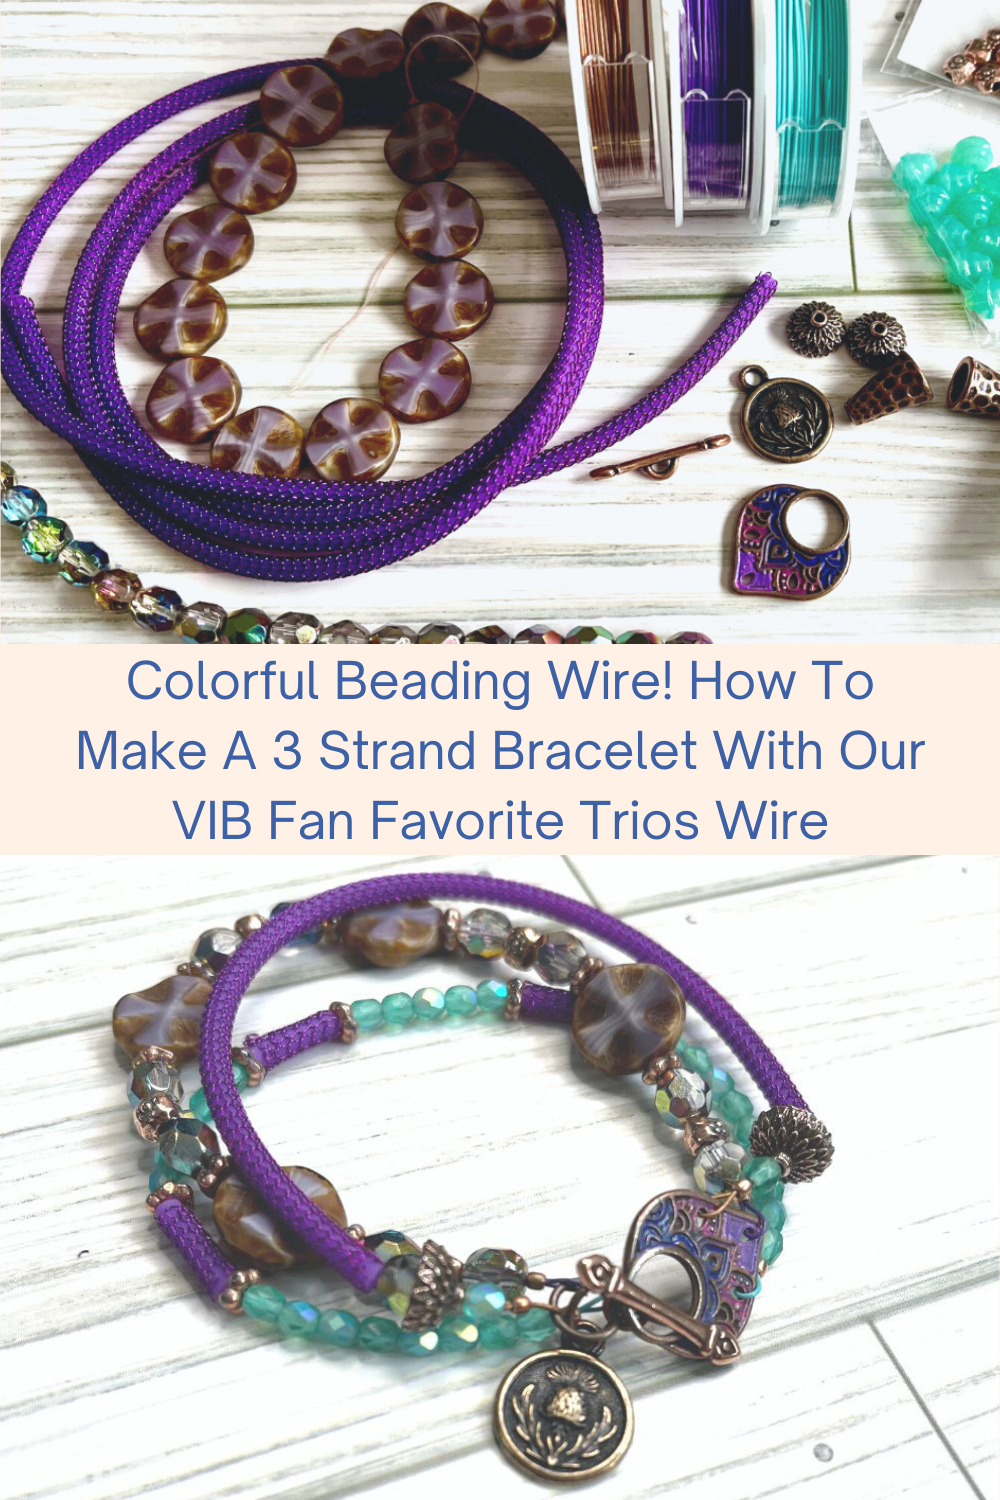 Colorful Beading Wire! How To Make A 3 Strand Bracelet With Our VIB Fan Favorite Trios Wire Collage